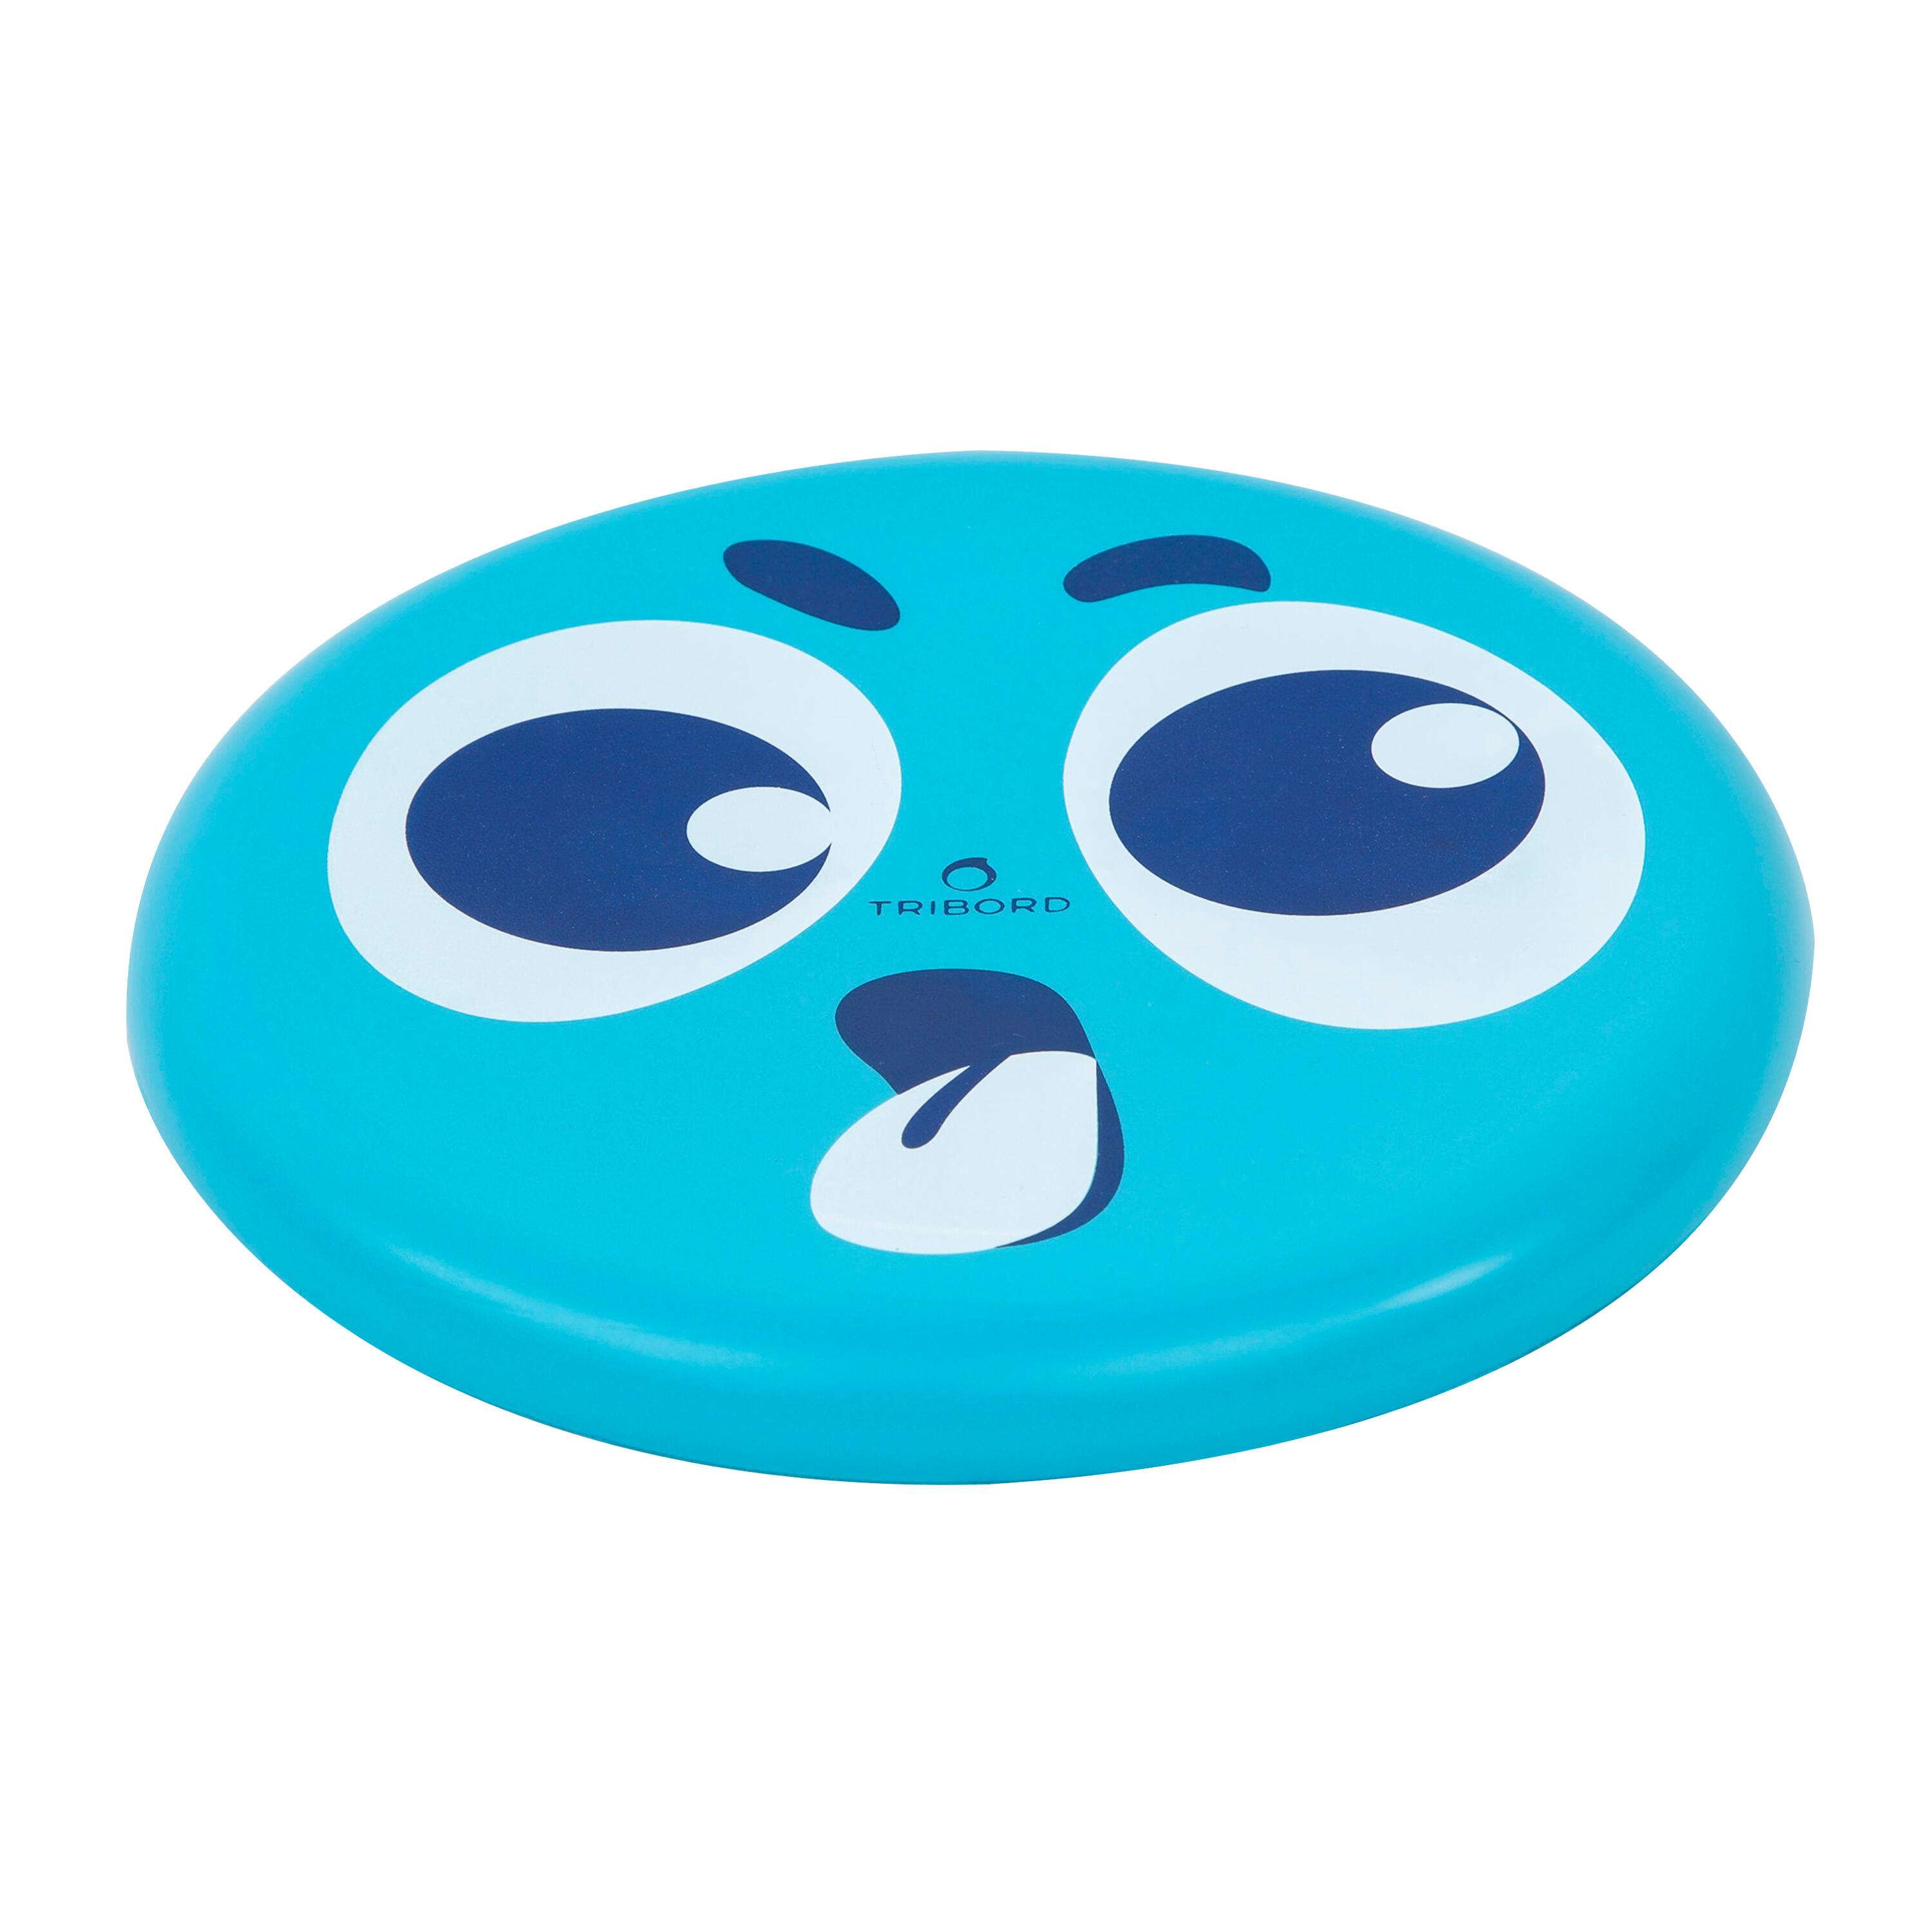 OLAIAN Flying Disc - Surprise Blue